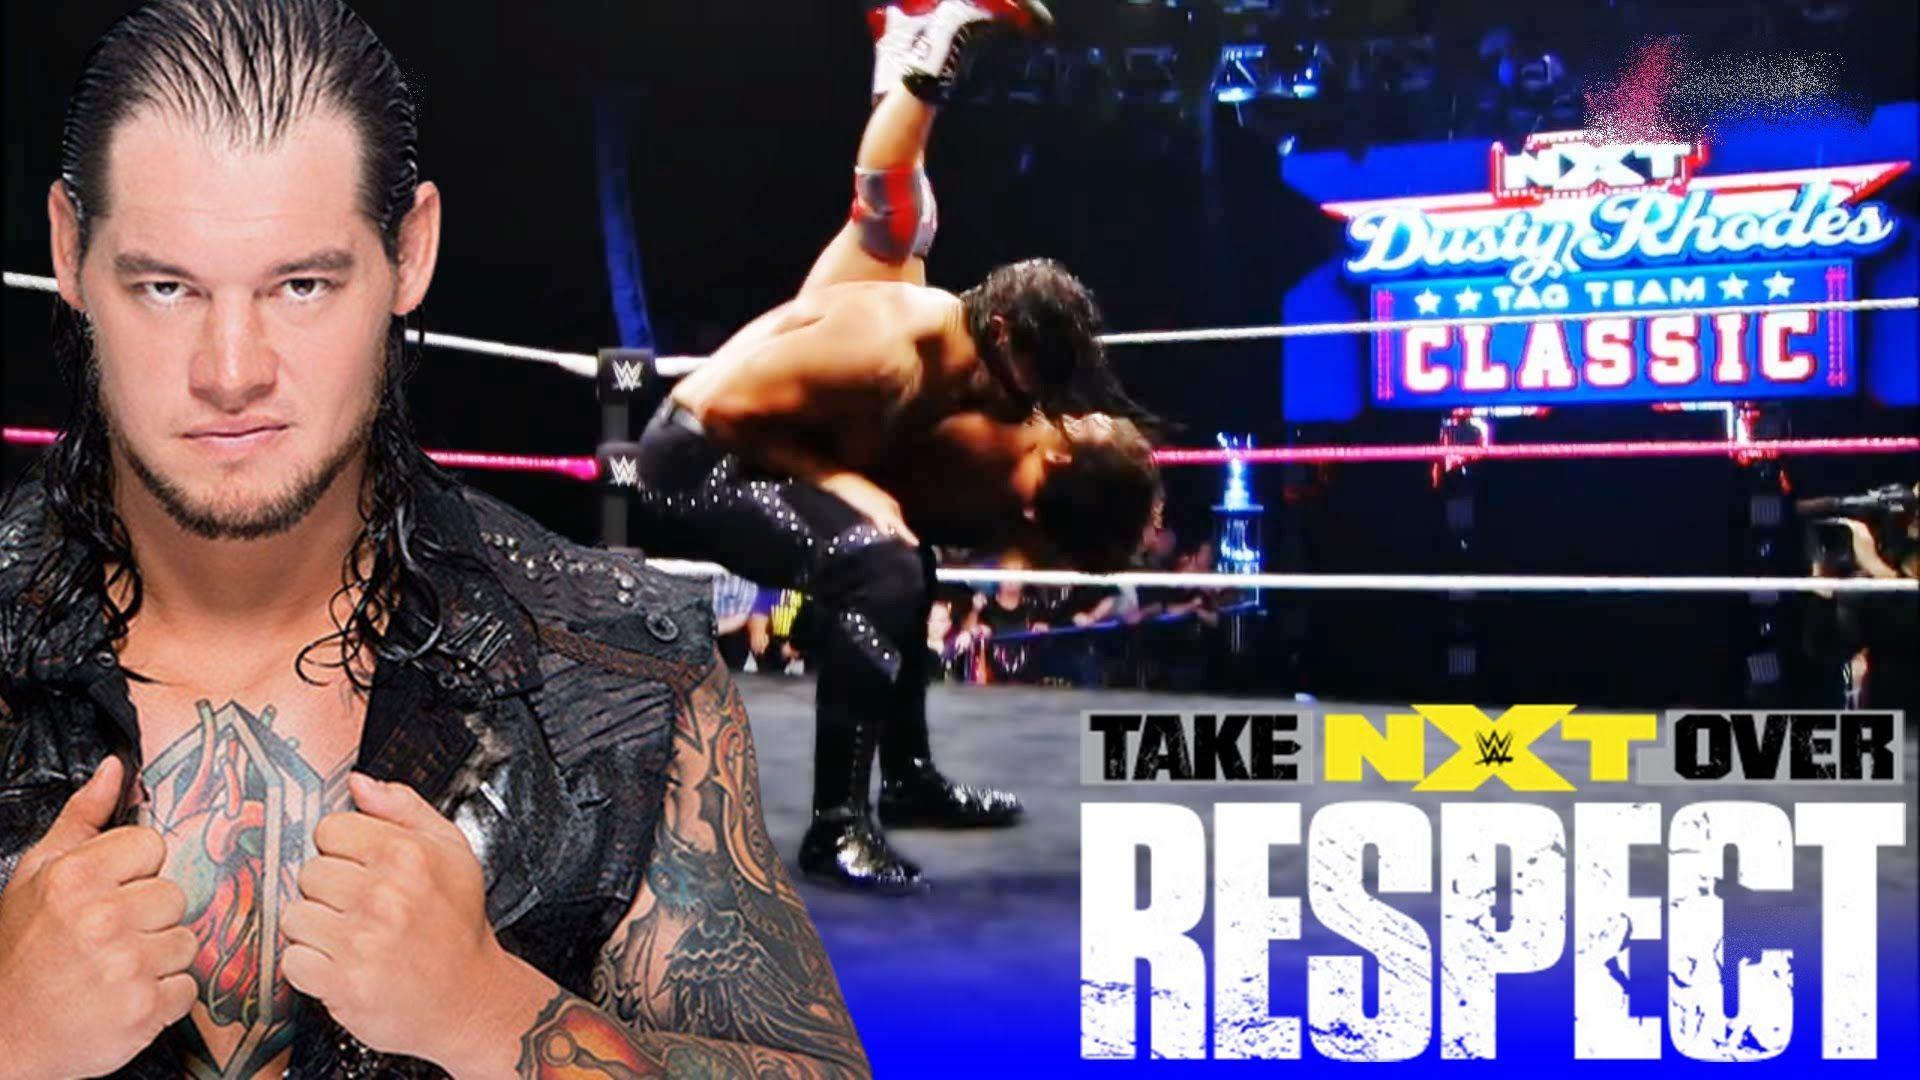 Baron Corbin Of Days on Chad Gable / NXT Takeover: Respect